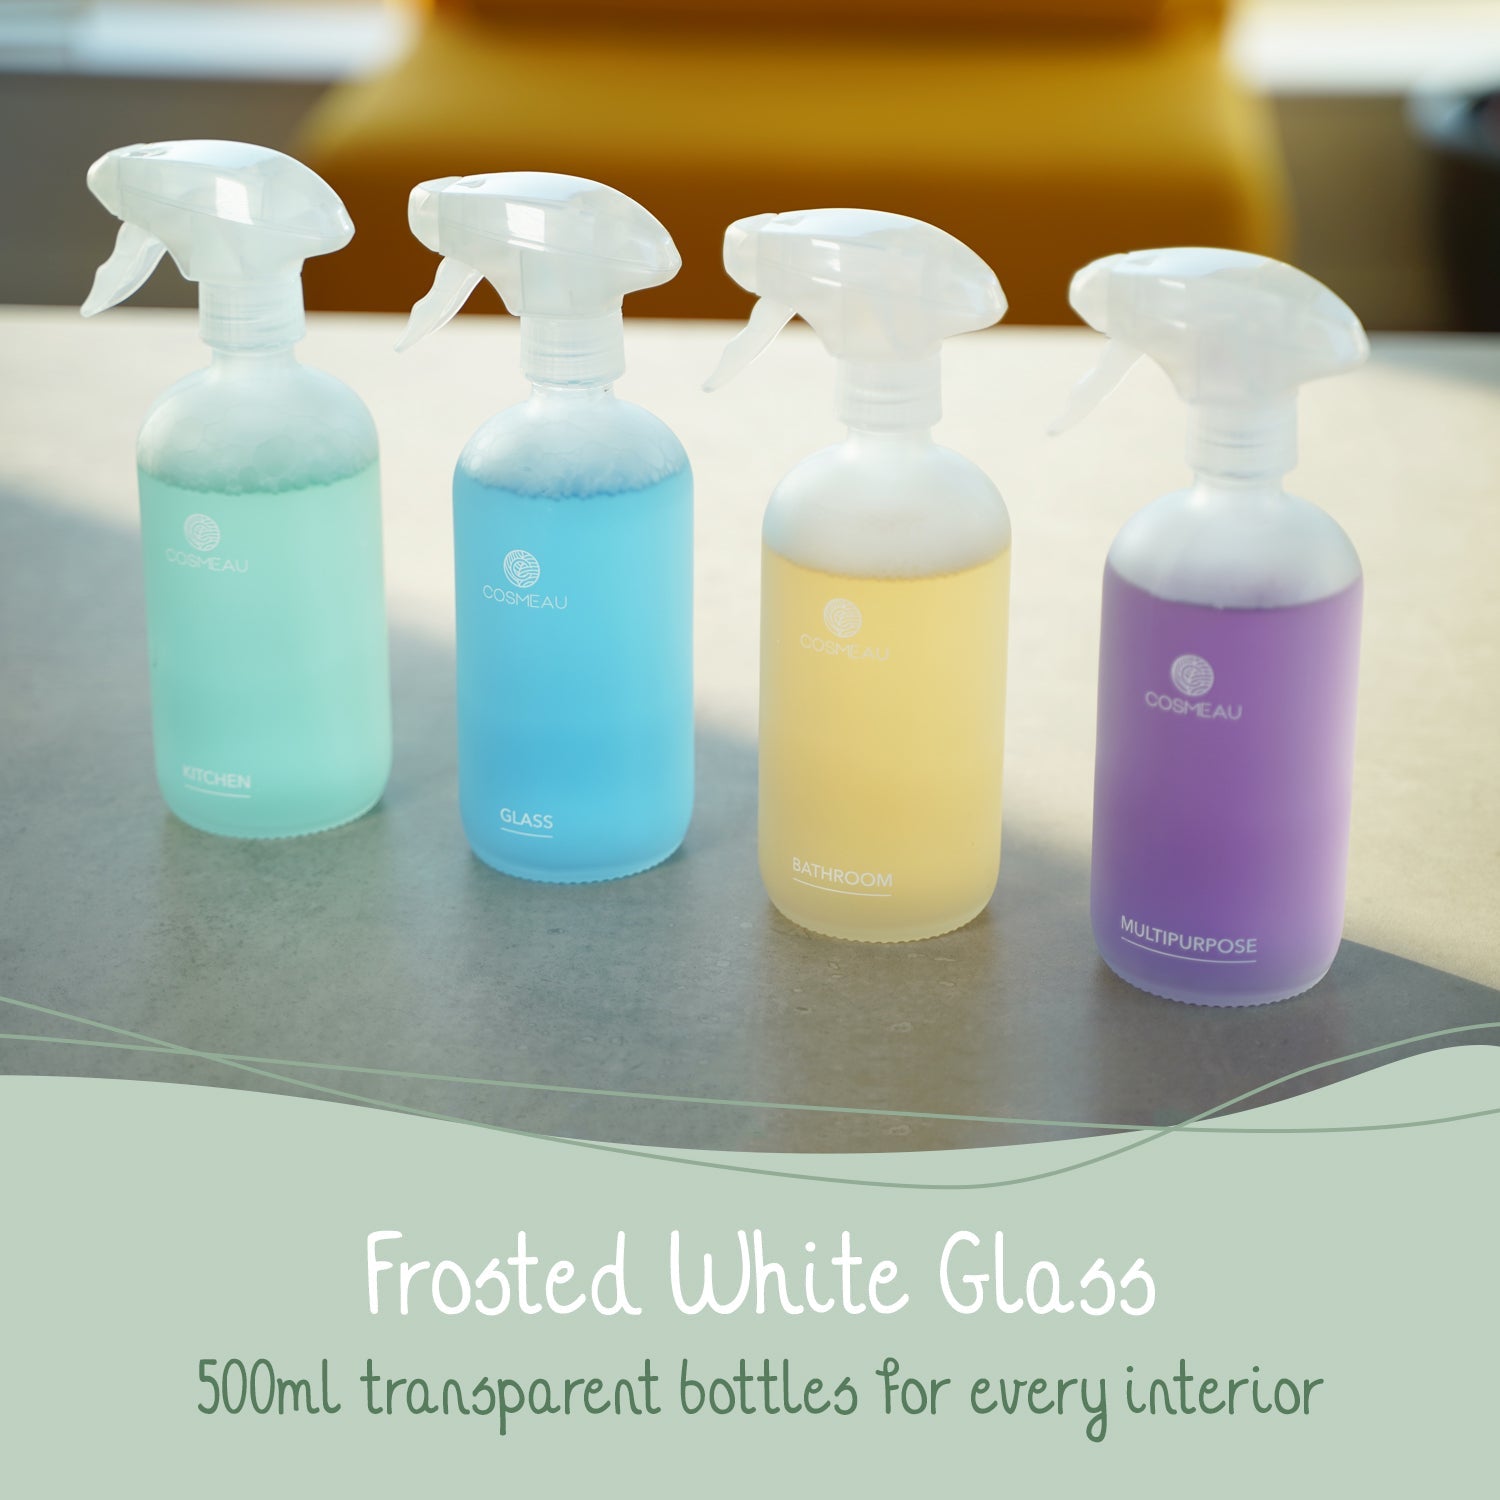 Cosmeau Multipurpose Spray Bottle Frosted White